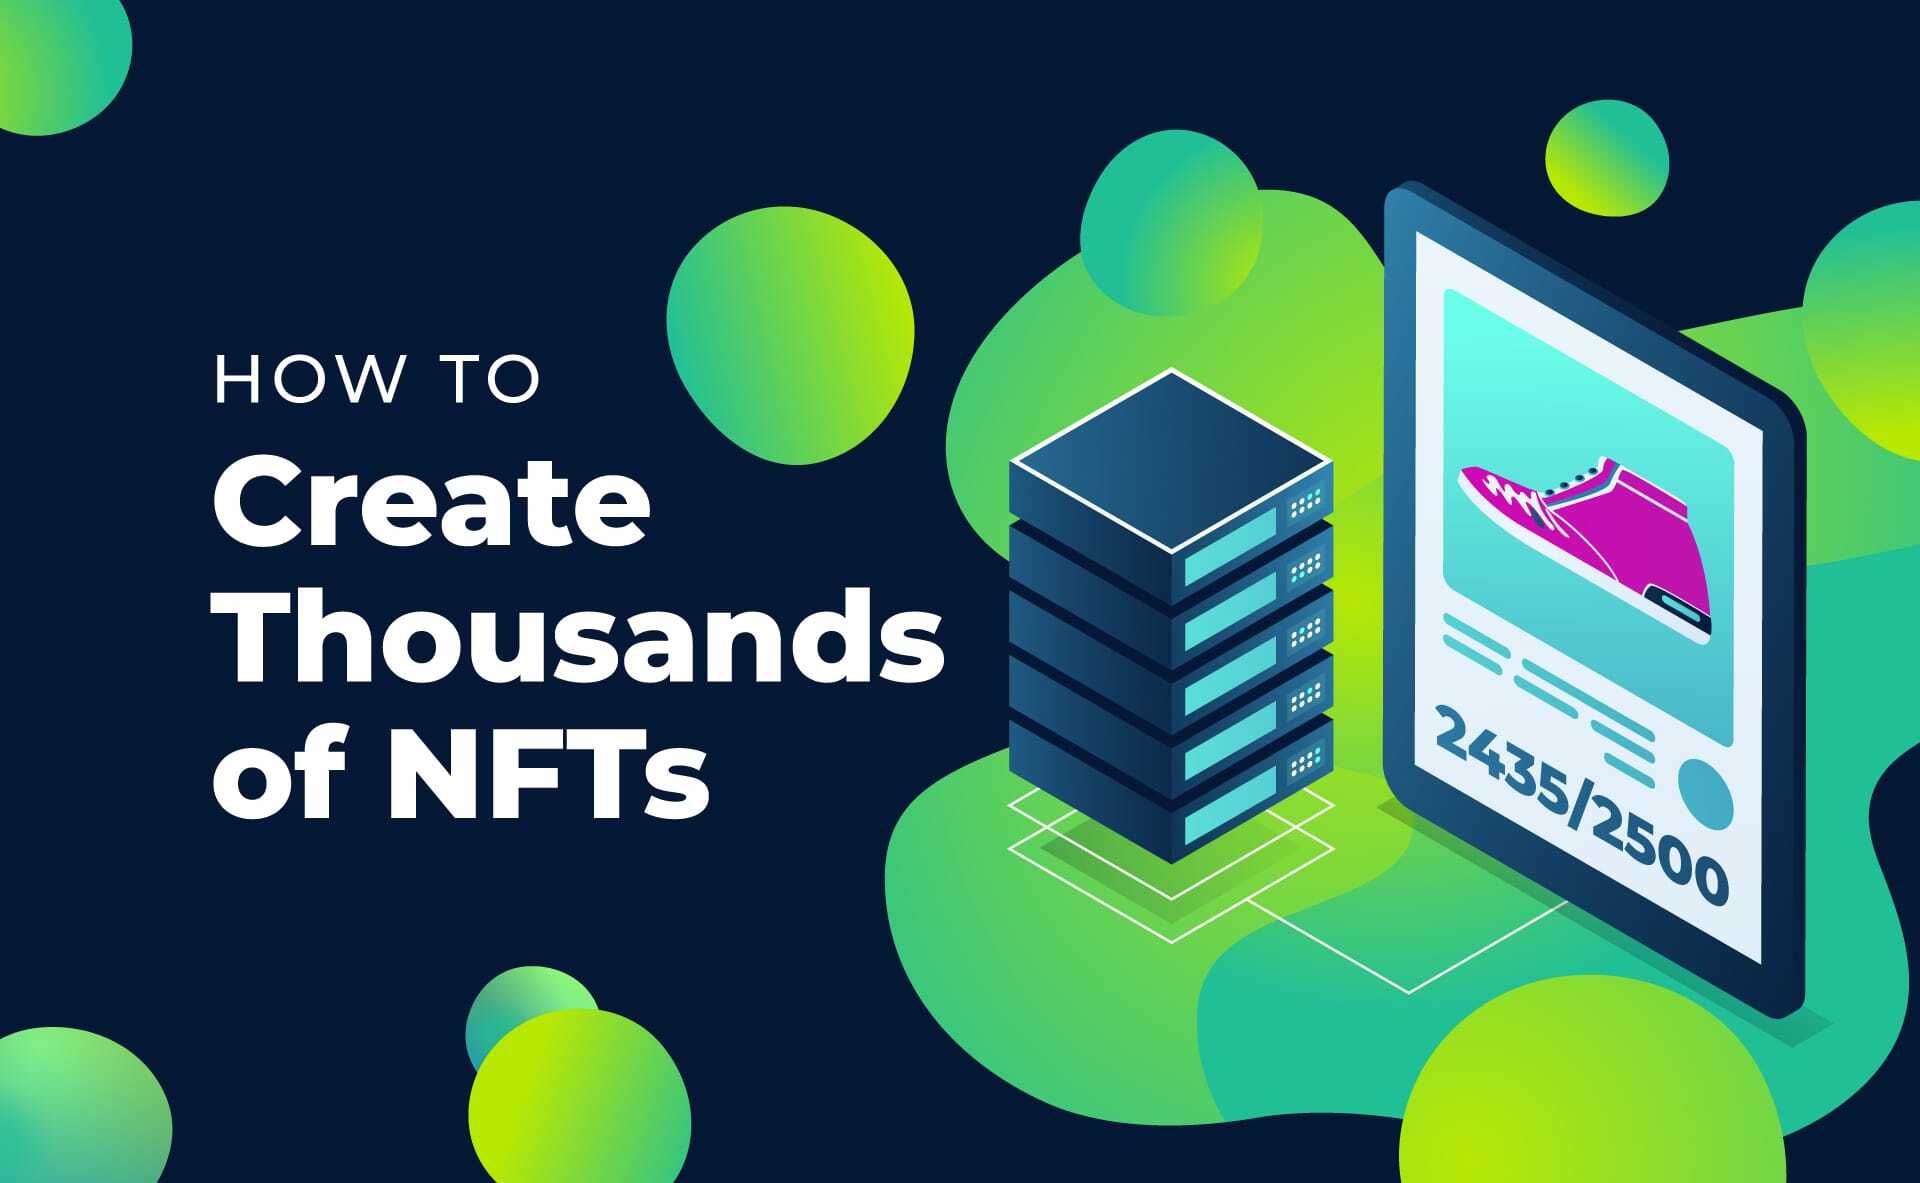 How to Create an Entire NFT Collection (10,000+) with 3 Steps by a  Programmer | by Ali Solanki 